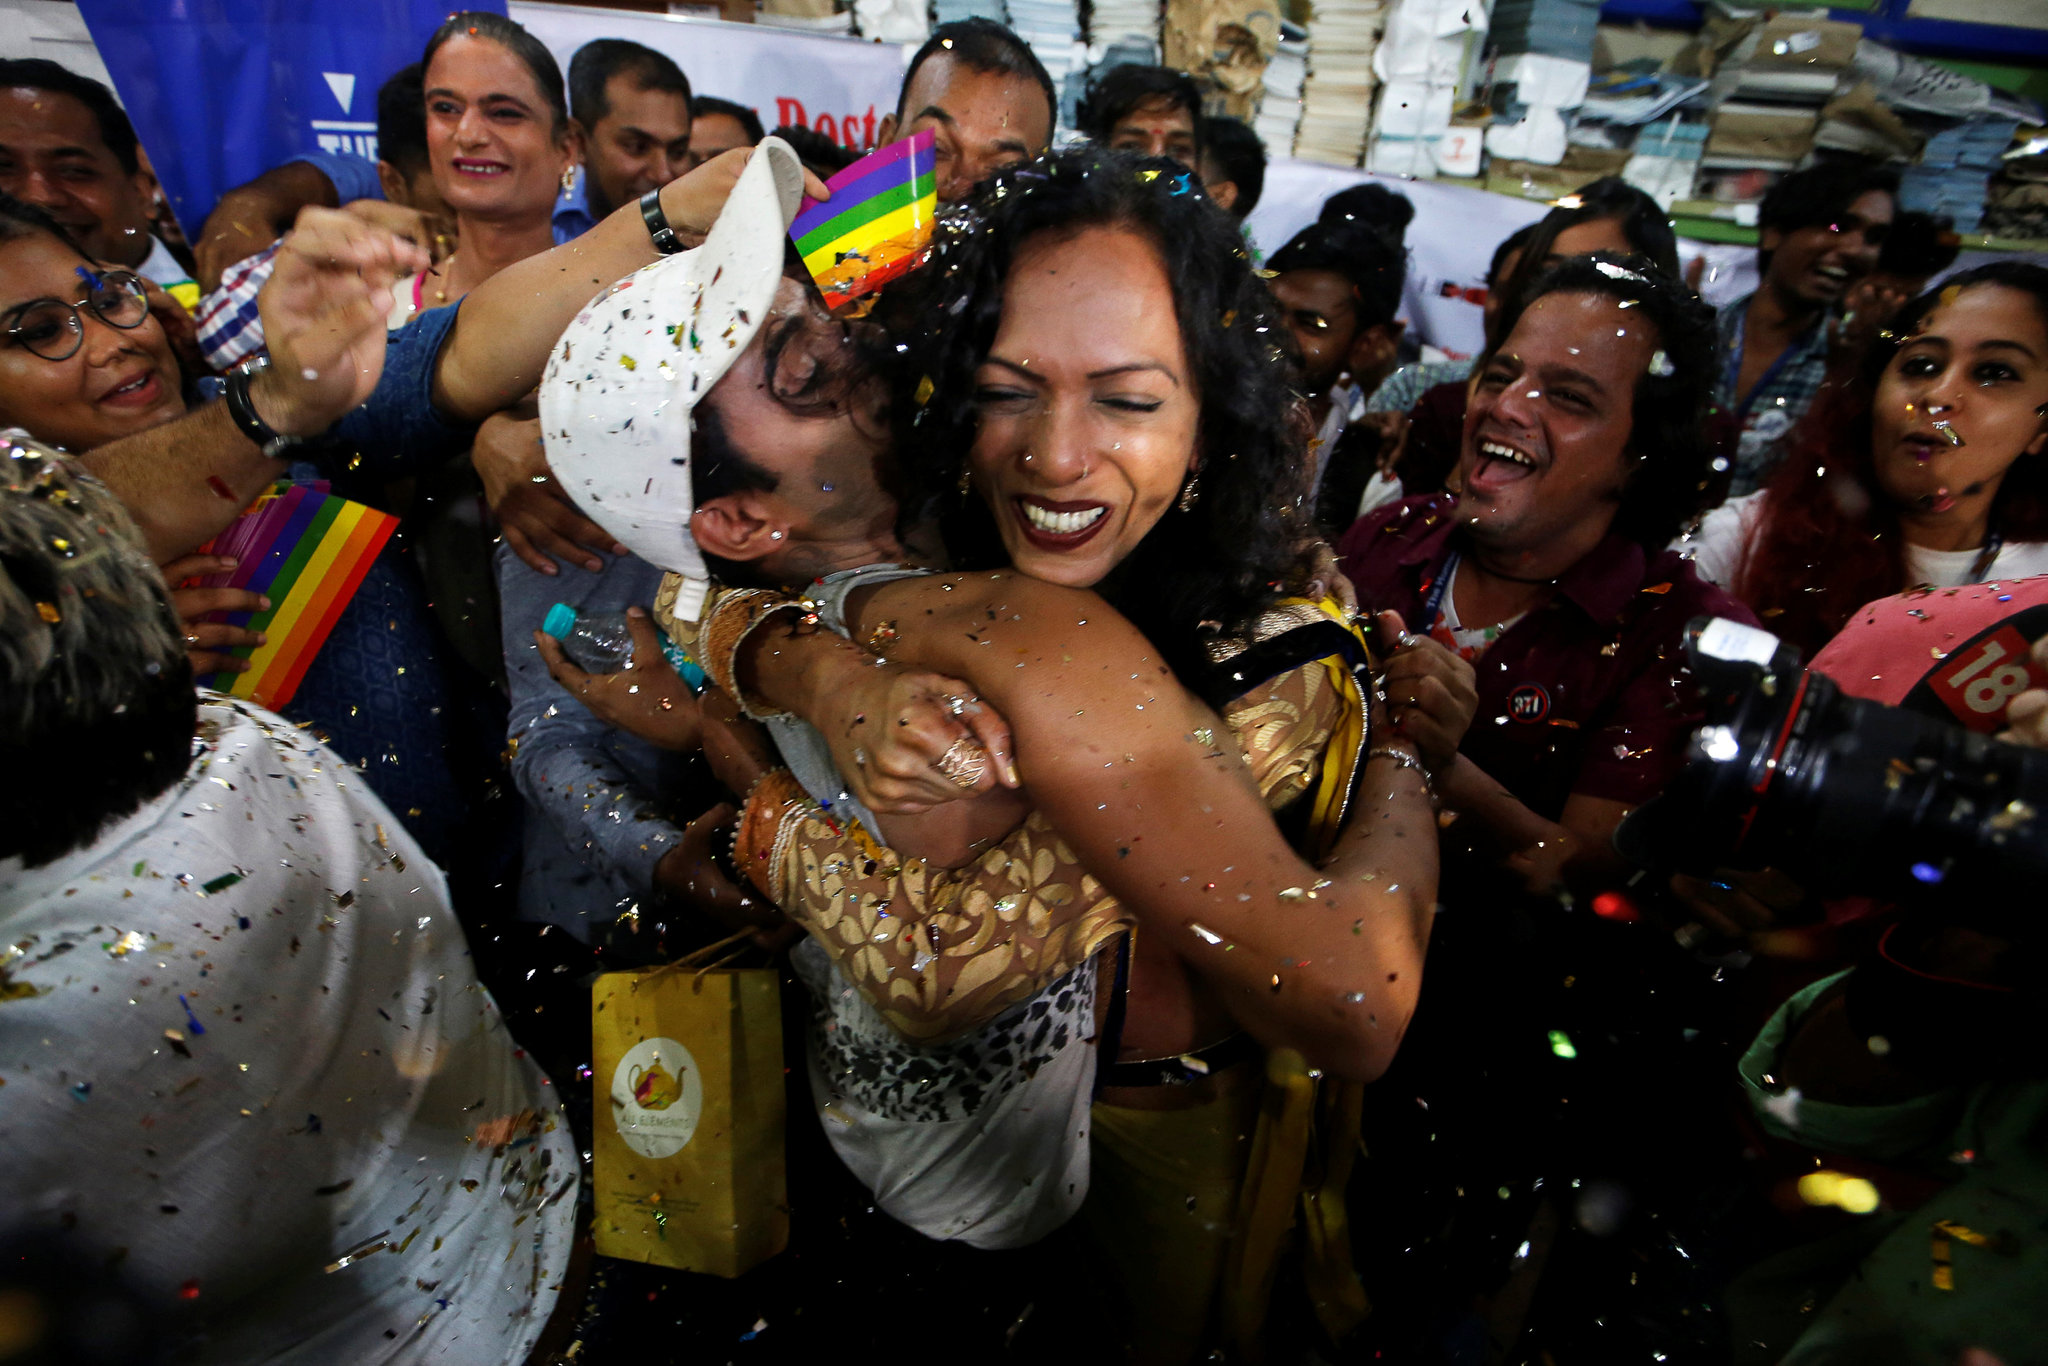 India Gay Sex Ban Is Struck Down. 'Indefensible,' Court Says ...